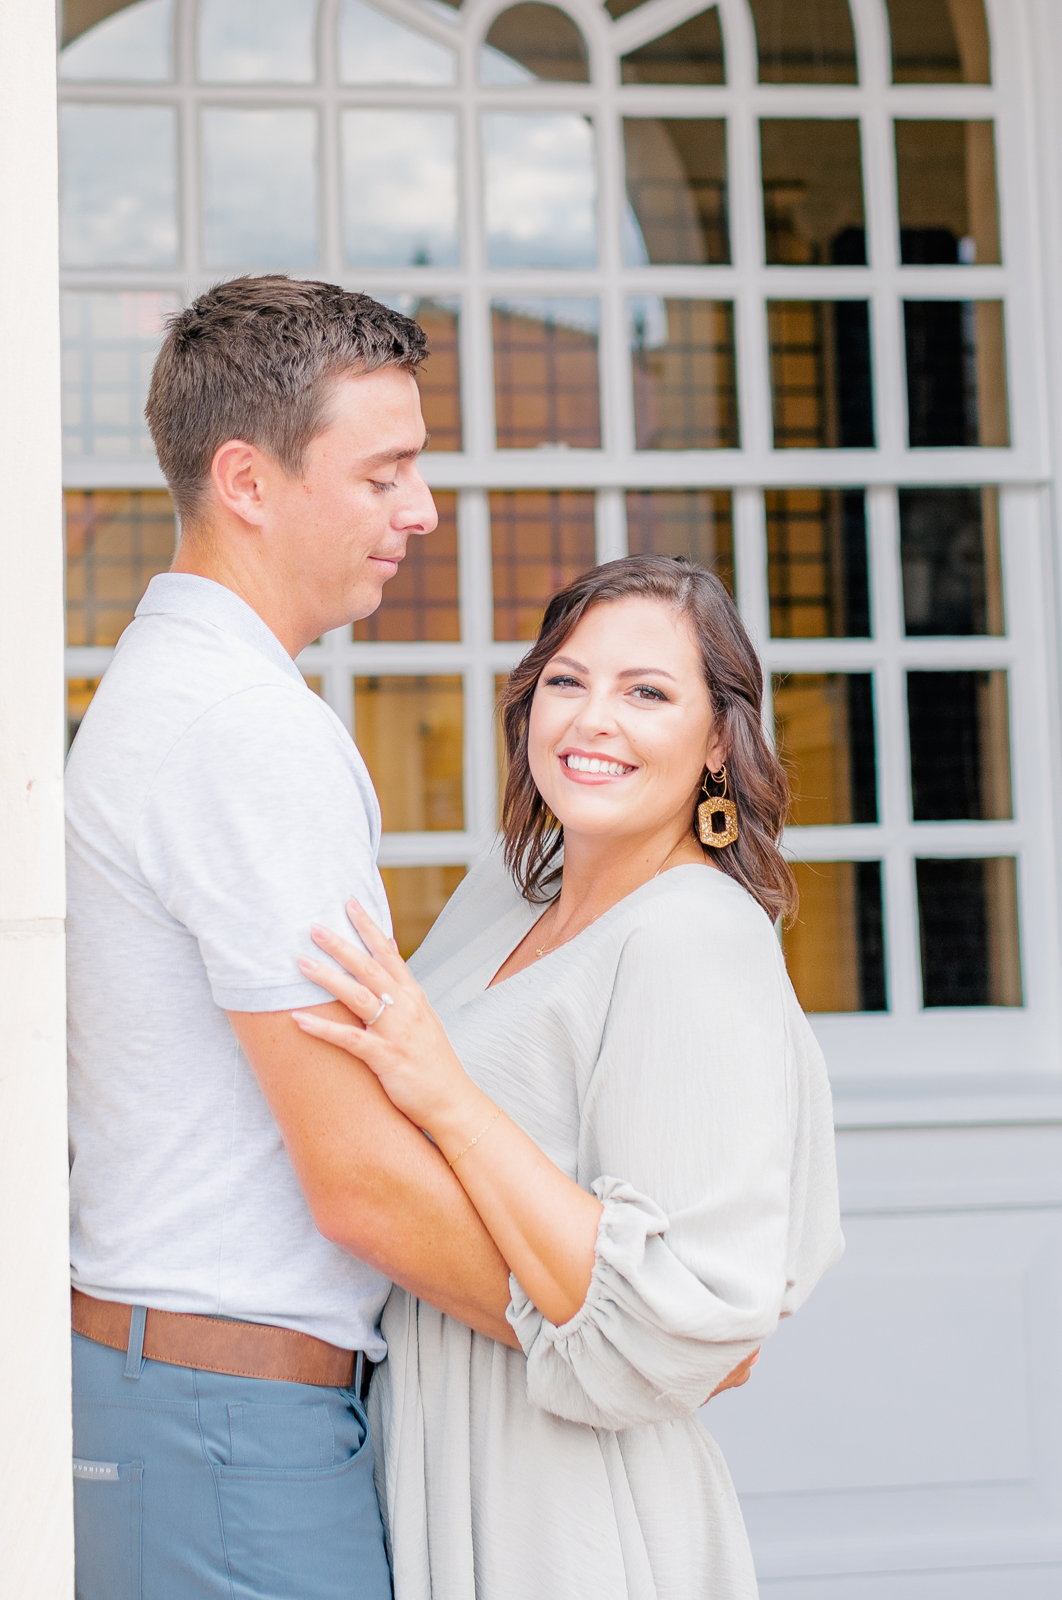 Katelyn and Peter's engagement session